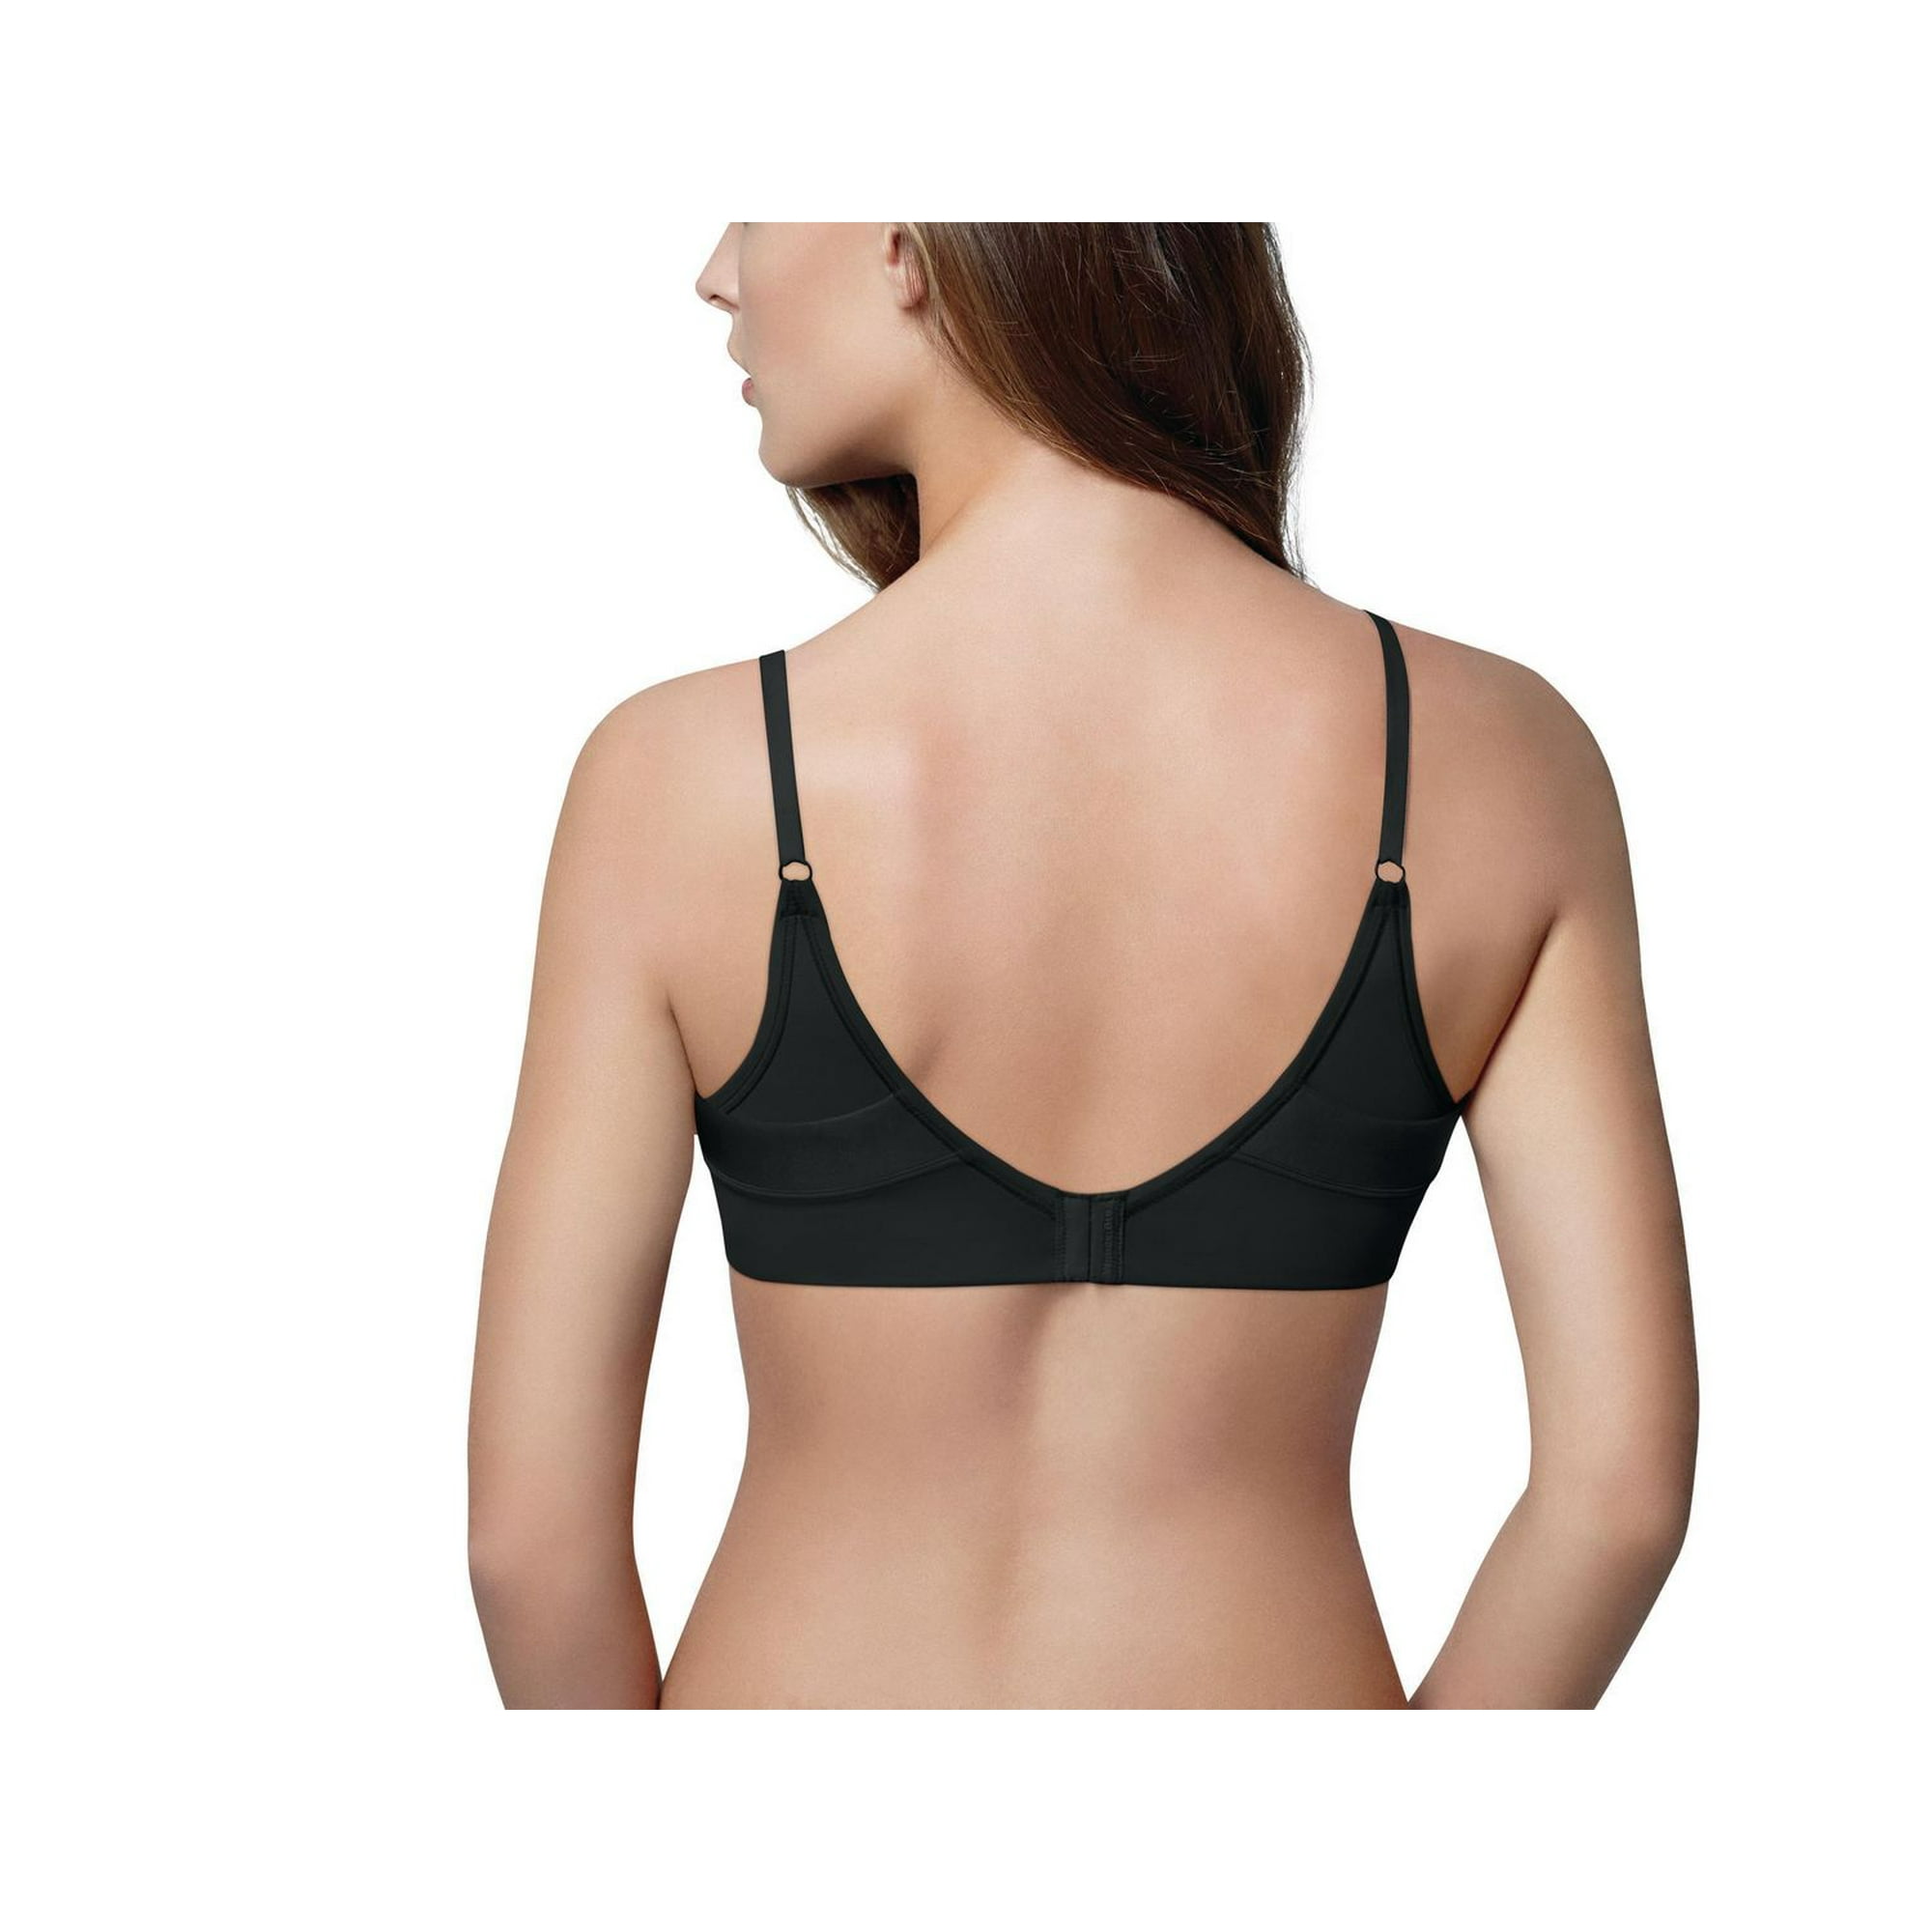 Breathable Wireless Ladie's Flannel Bra Supplier From China